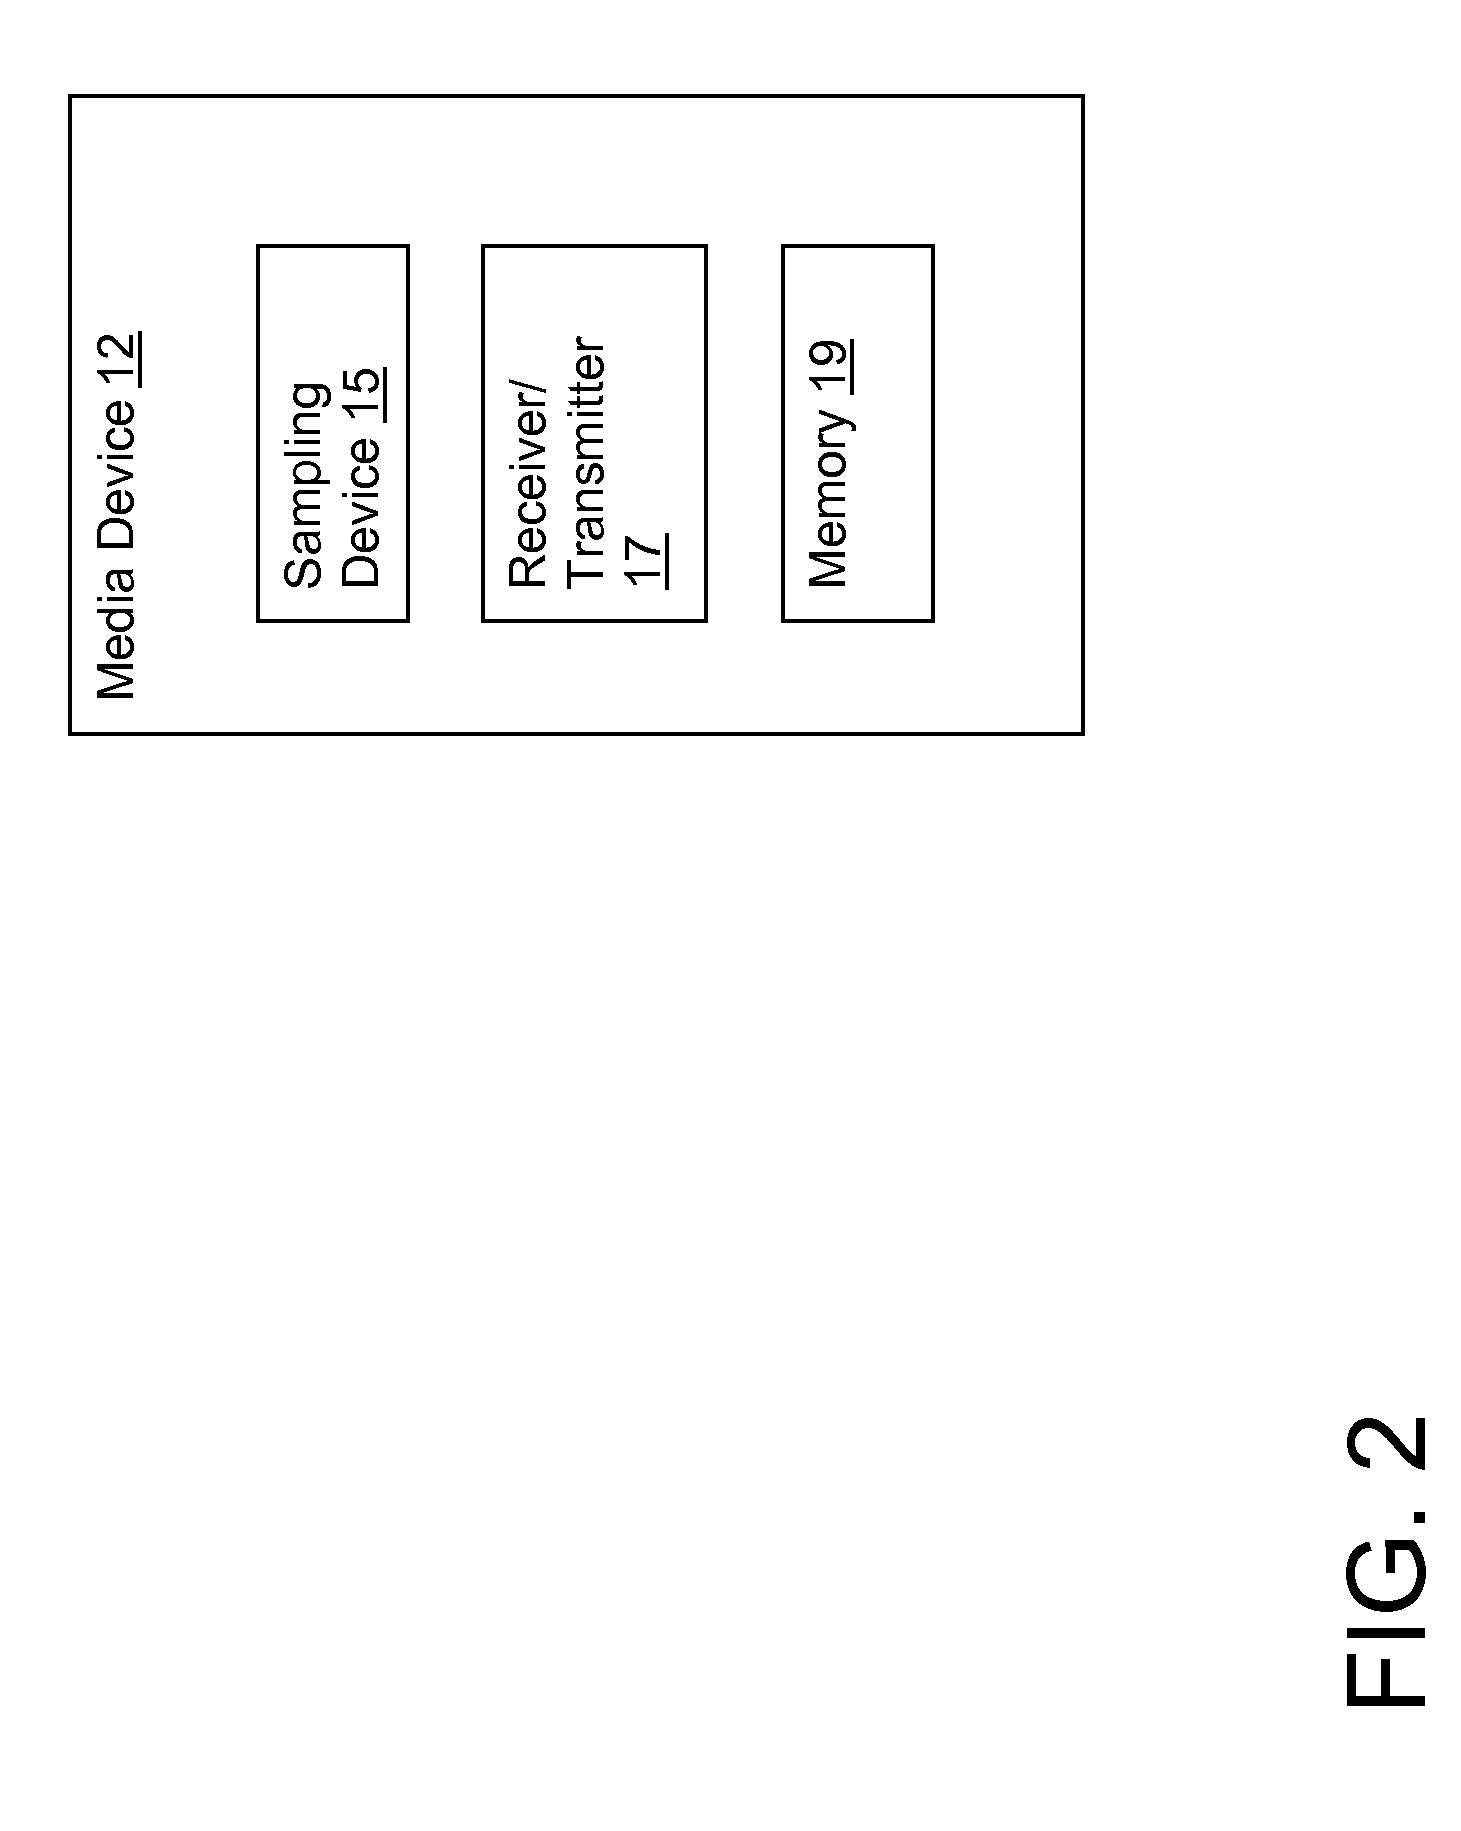 System and method for identifying and downloading broadcast programming content